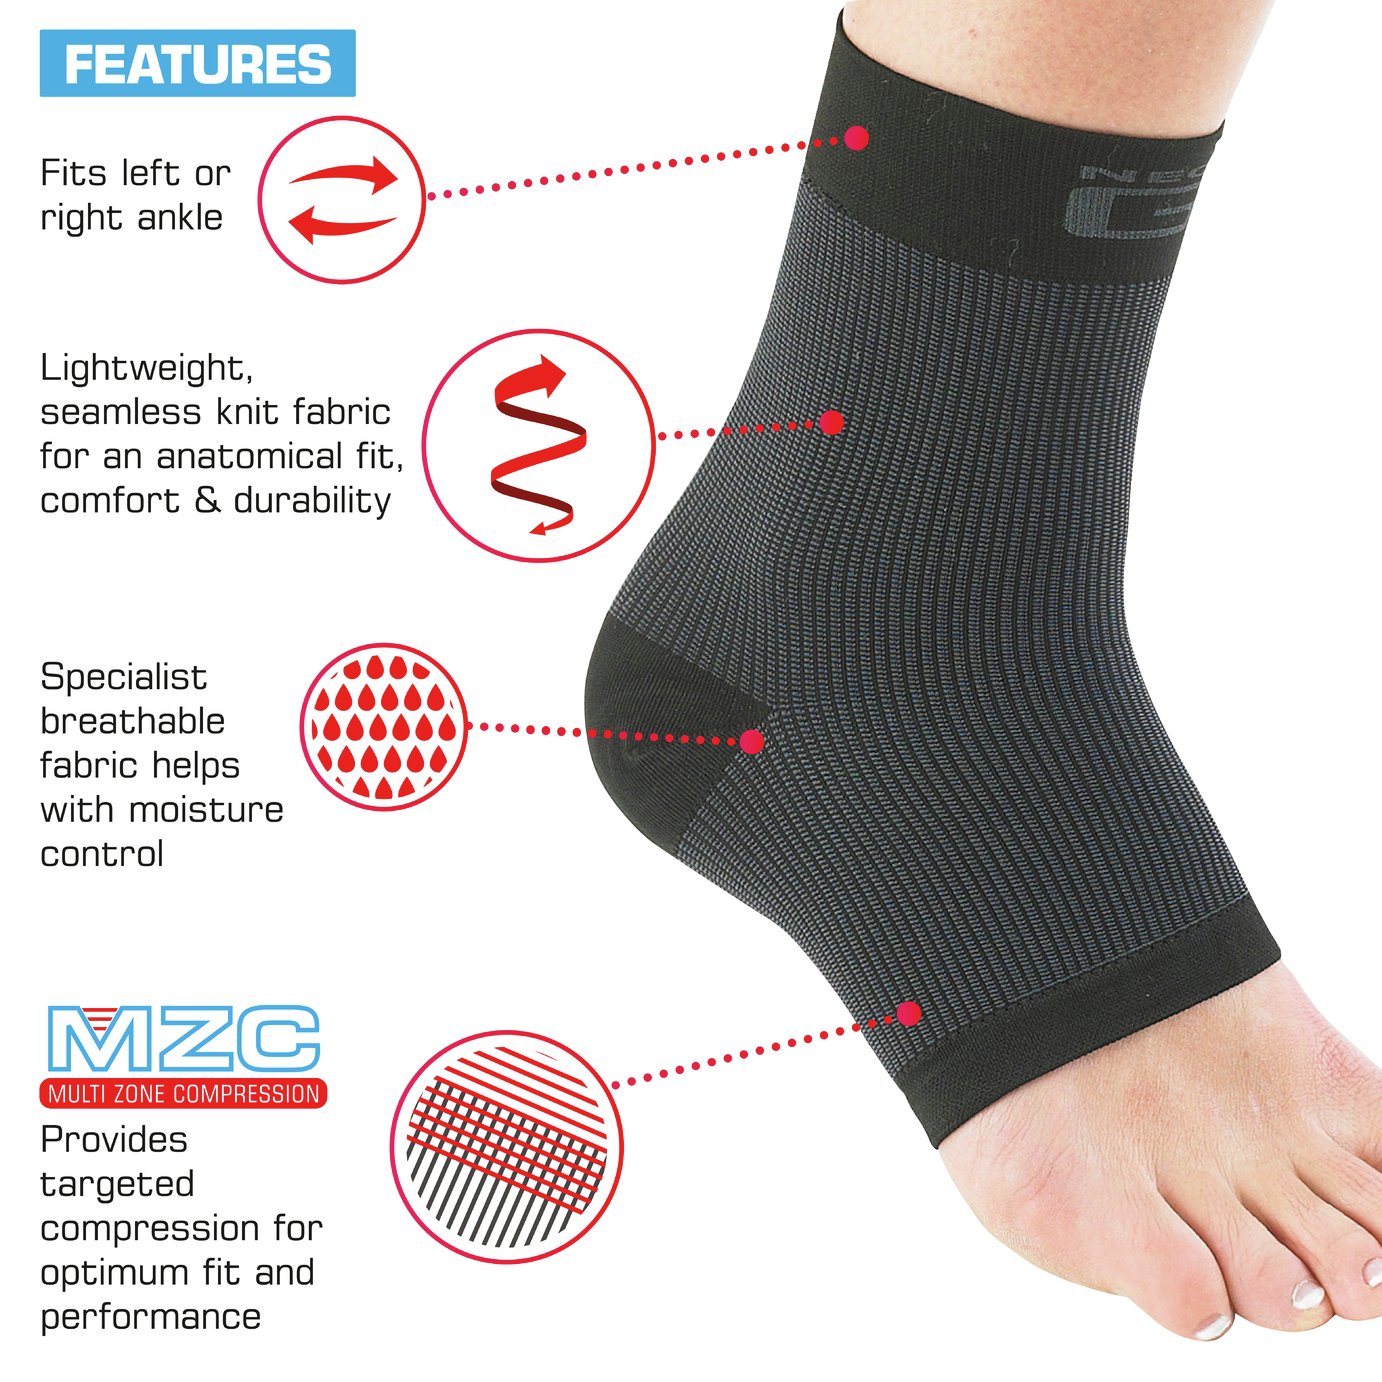 Neo G Airflow Ankle Support Reviews - Updated November 2022